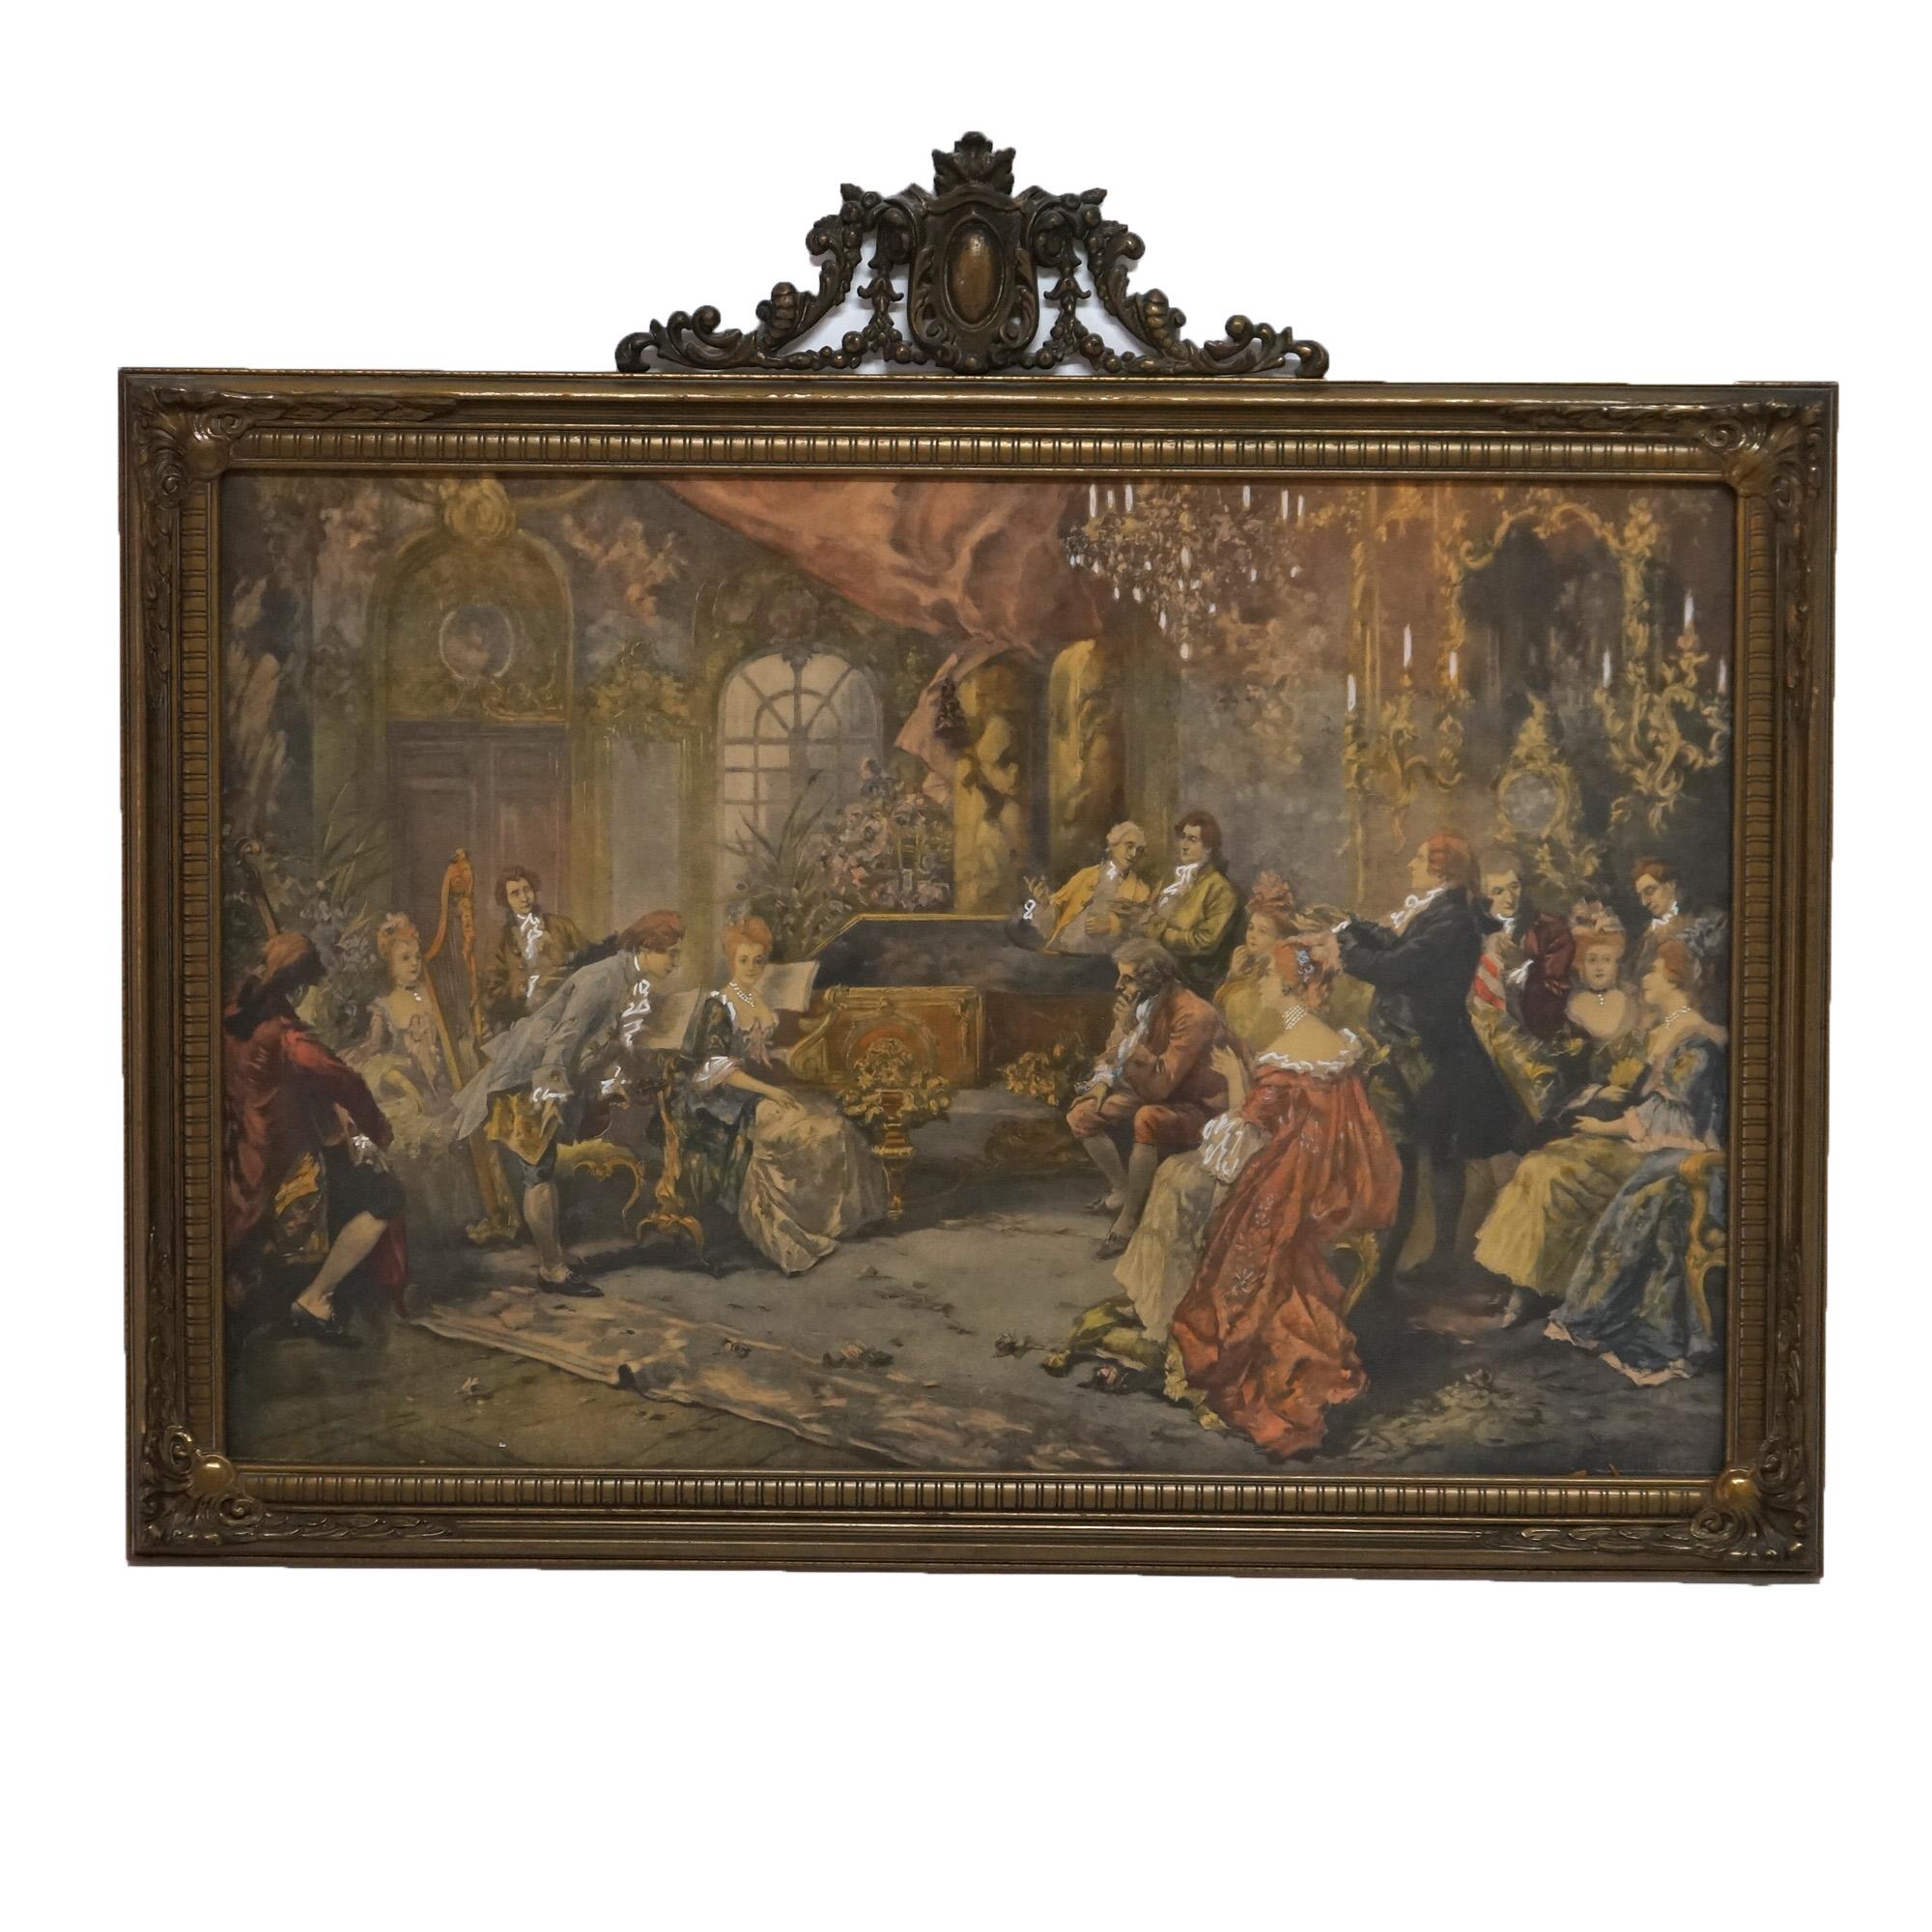 French Louis XIV Style Framed Parlor Print “Mozart At The Court Of Marie Antionette” 20thC

Measures- 28.5''H x 33.5''W x 1.25''D; 20.25'' x 19.5'' sight